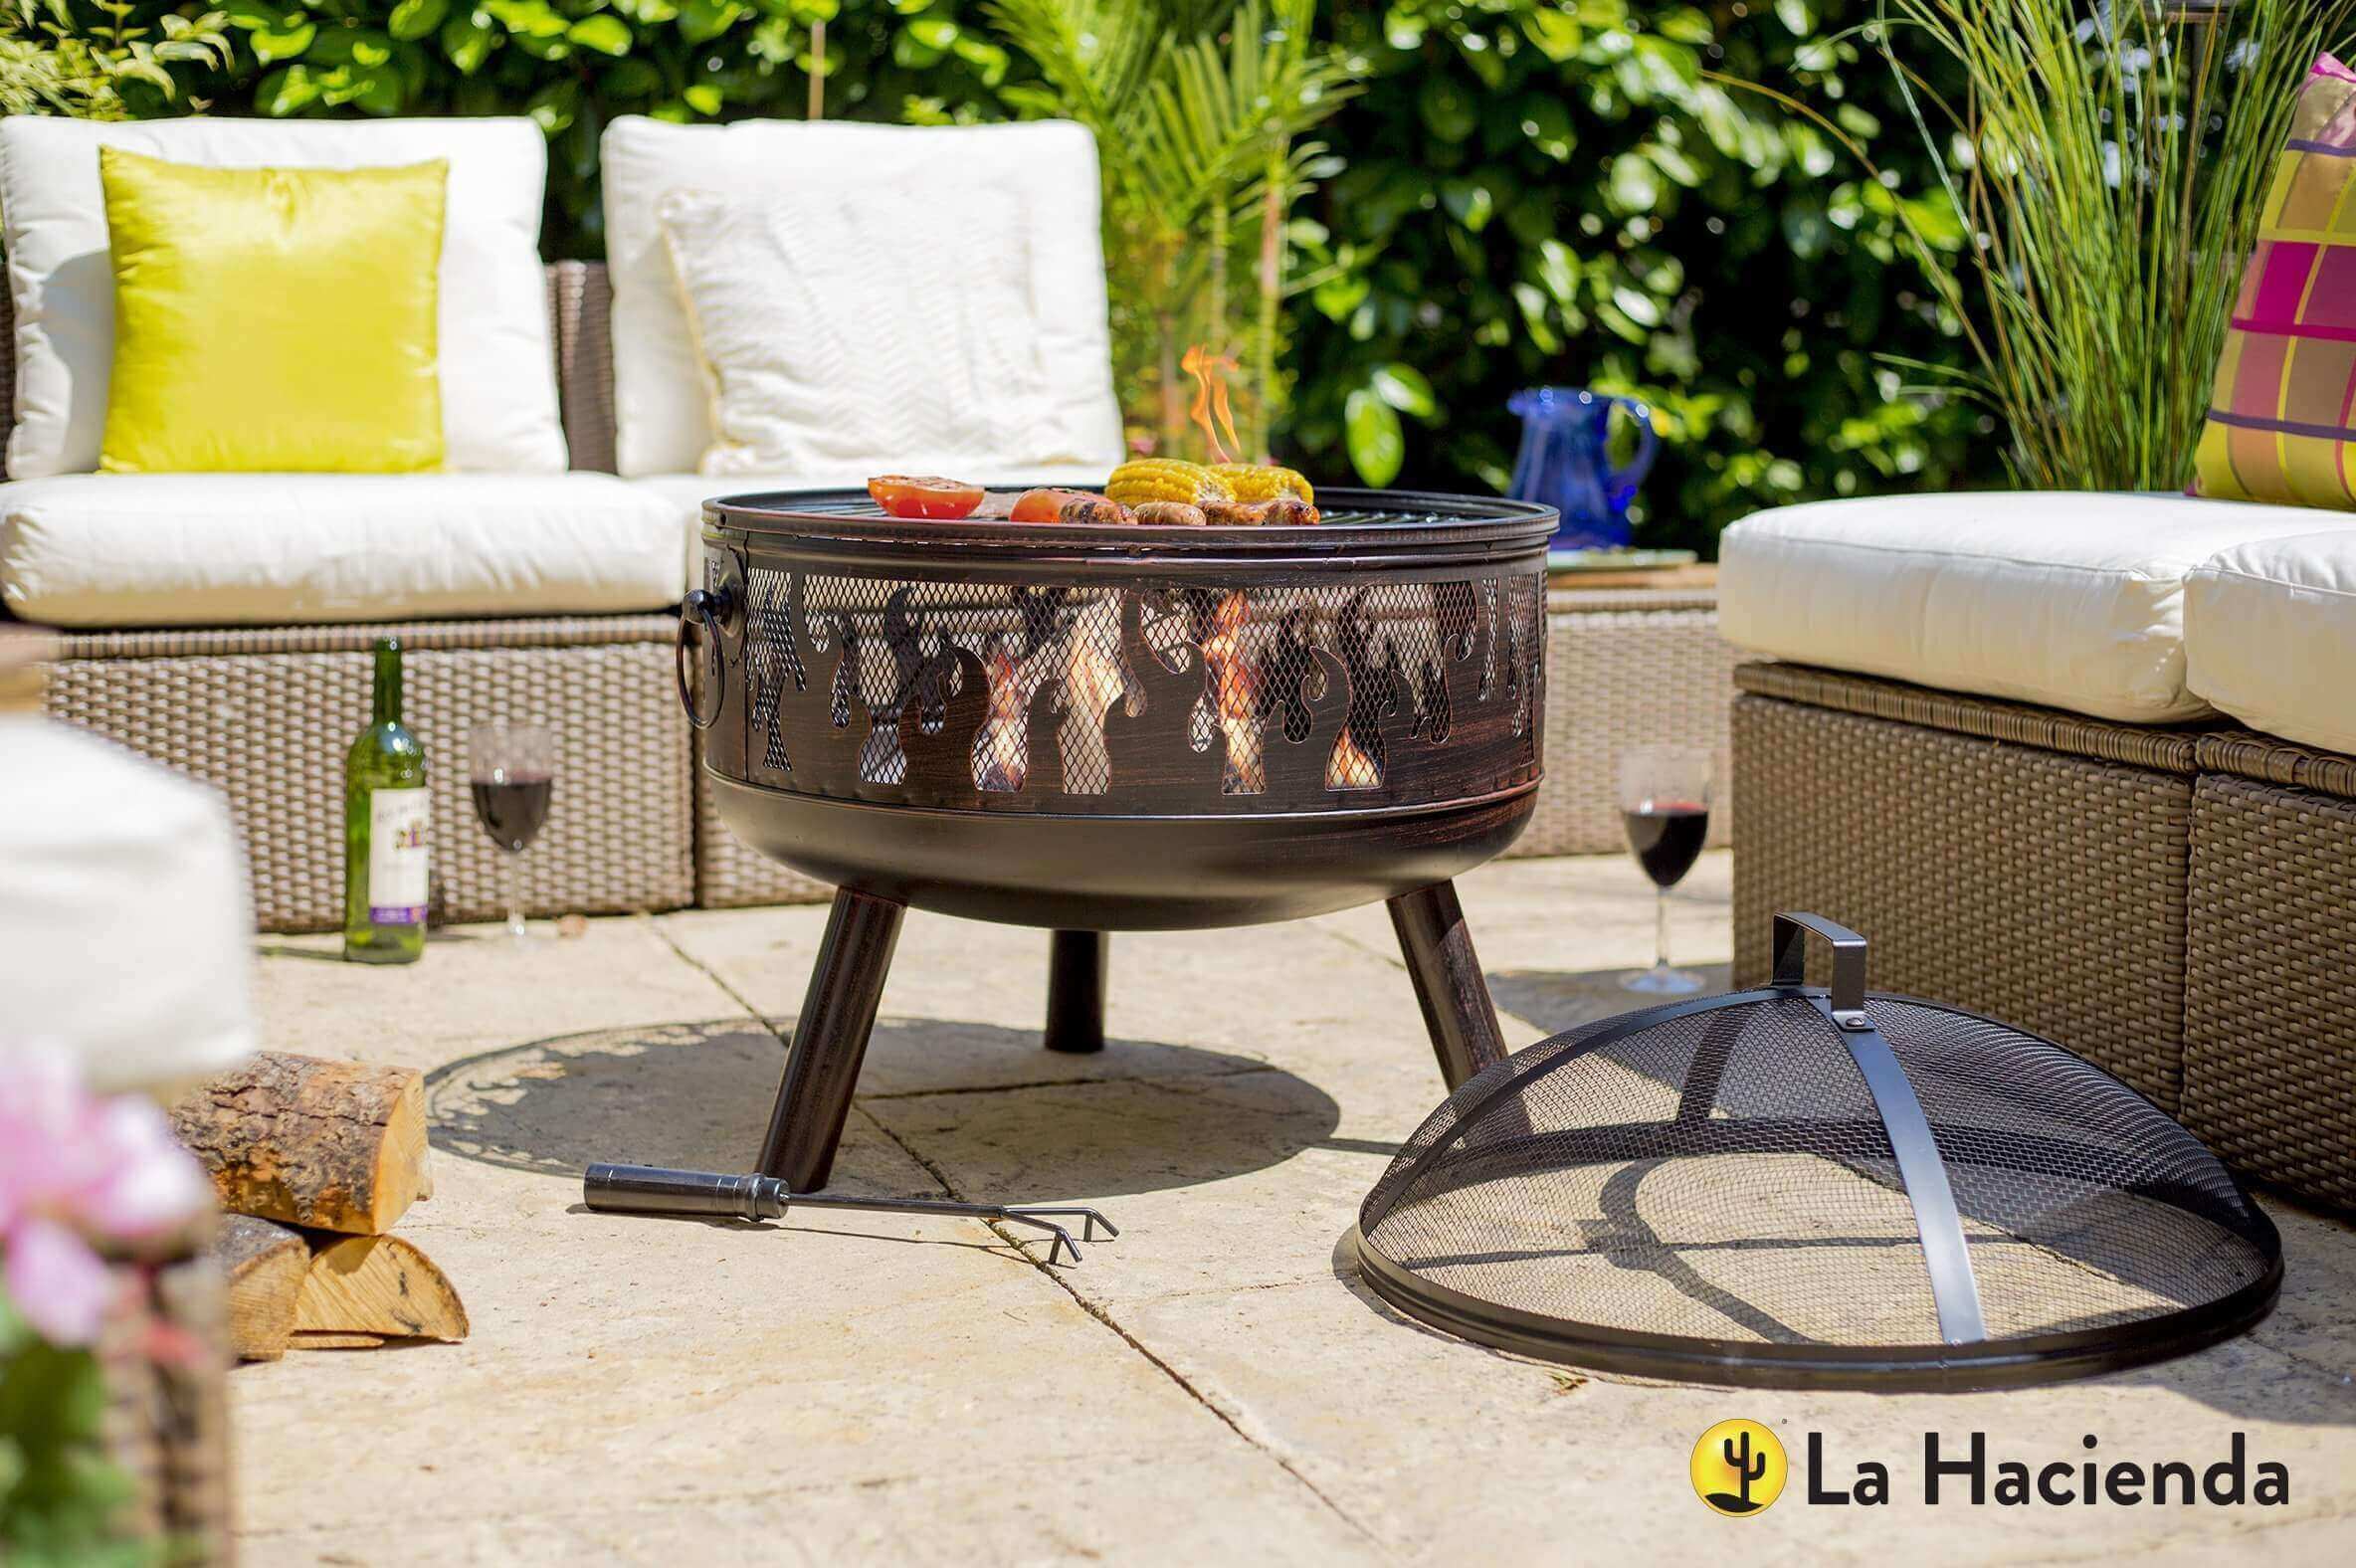 Steel firepit with BBQ grill attachment